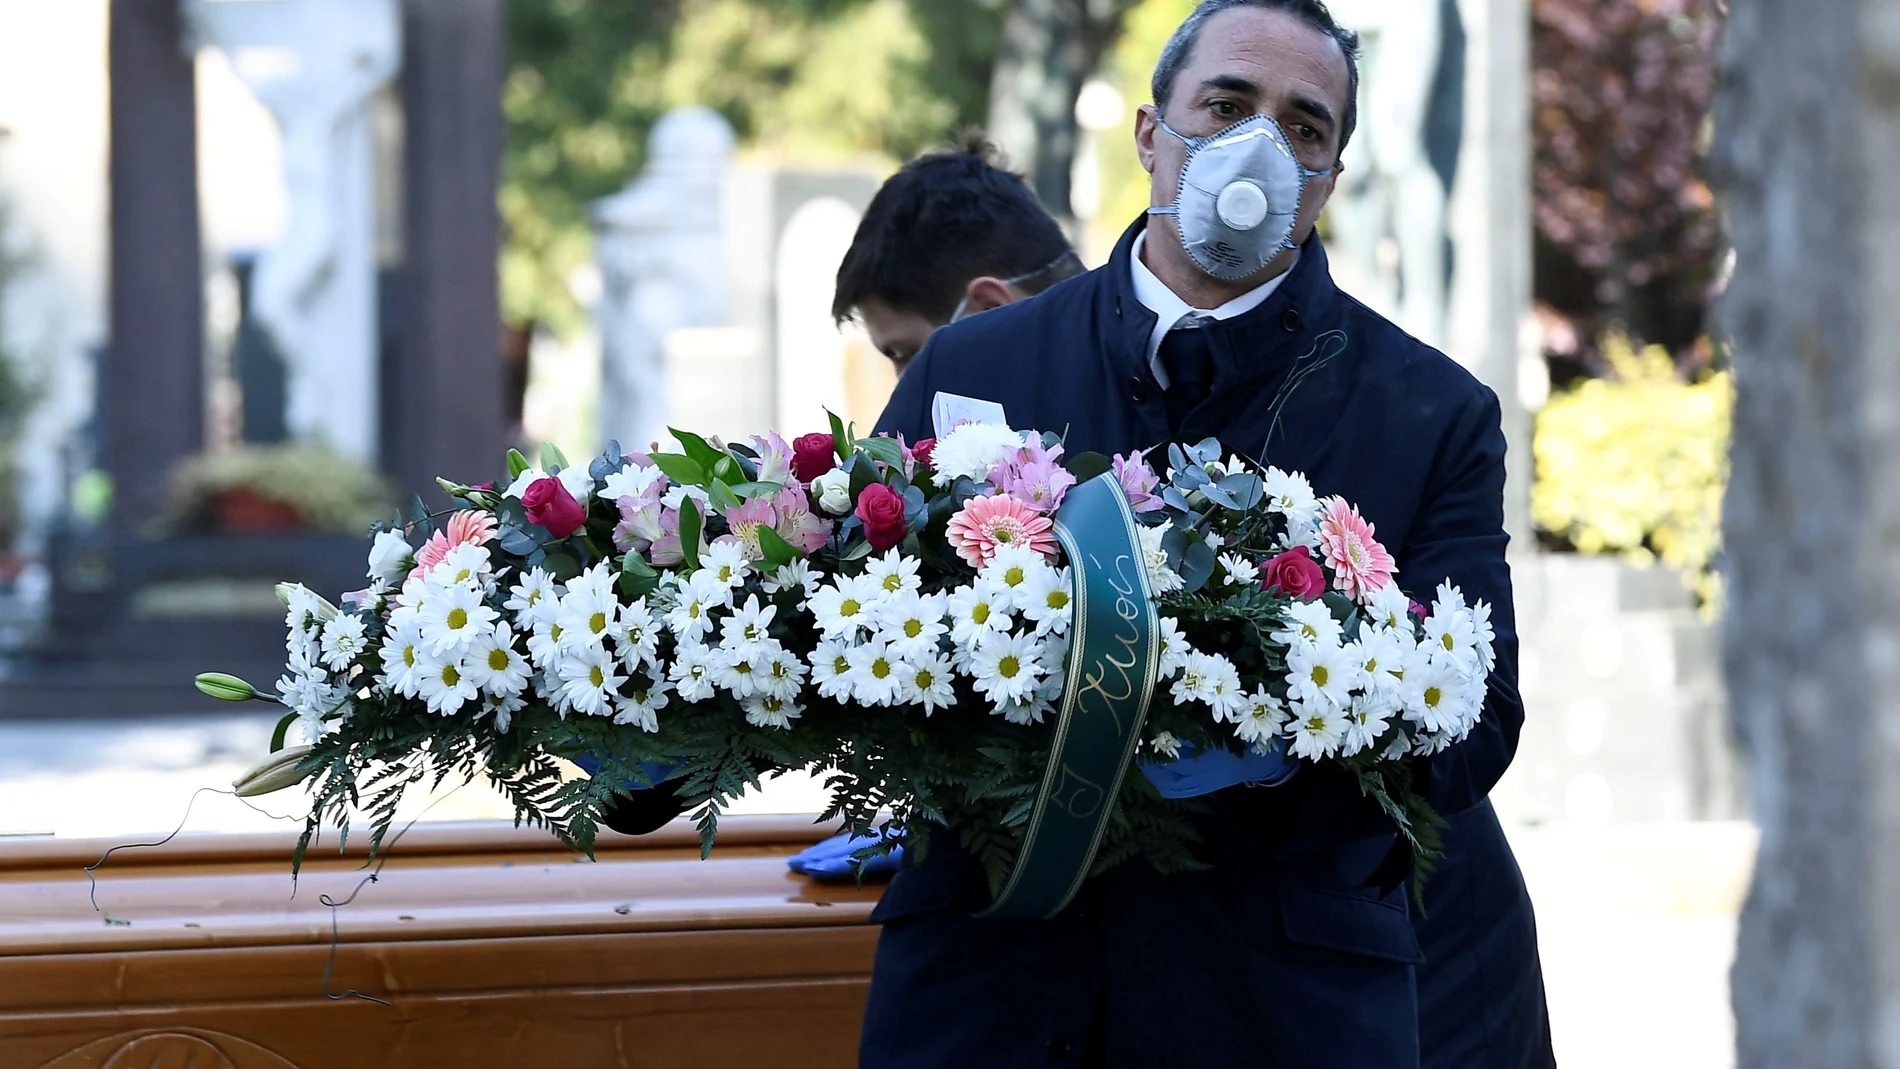 FILE PHOTO: Cemetery workers and funeral agency workers in protective masks transport a coffin of a person who died from coronavirus disease (COVID-19), into a cemetery in Bergamo